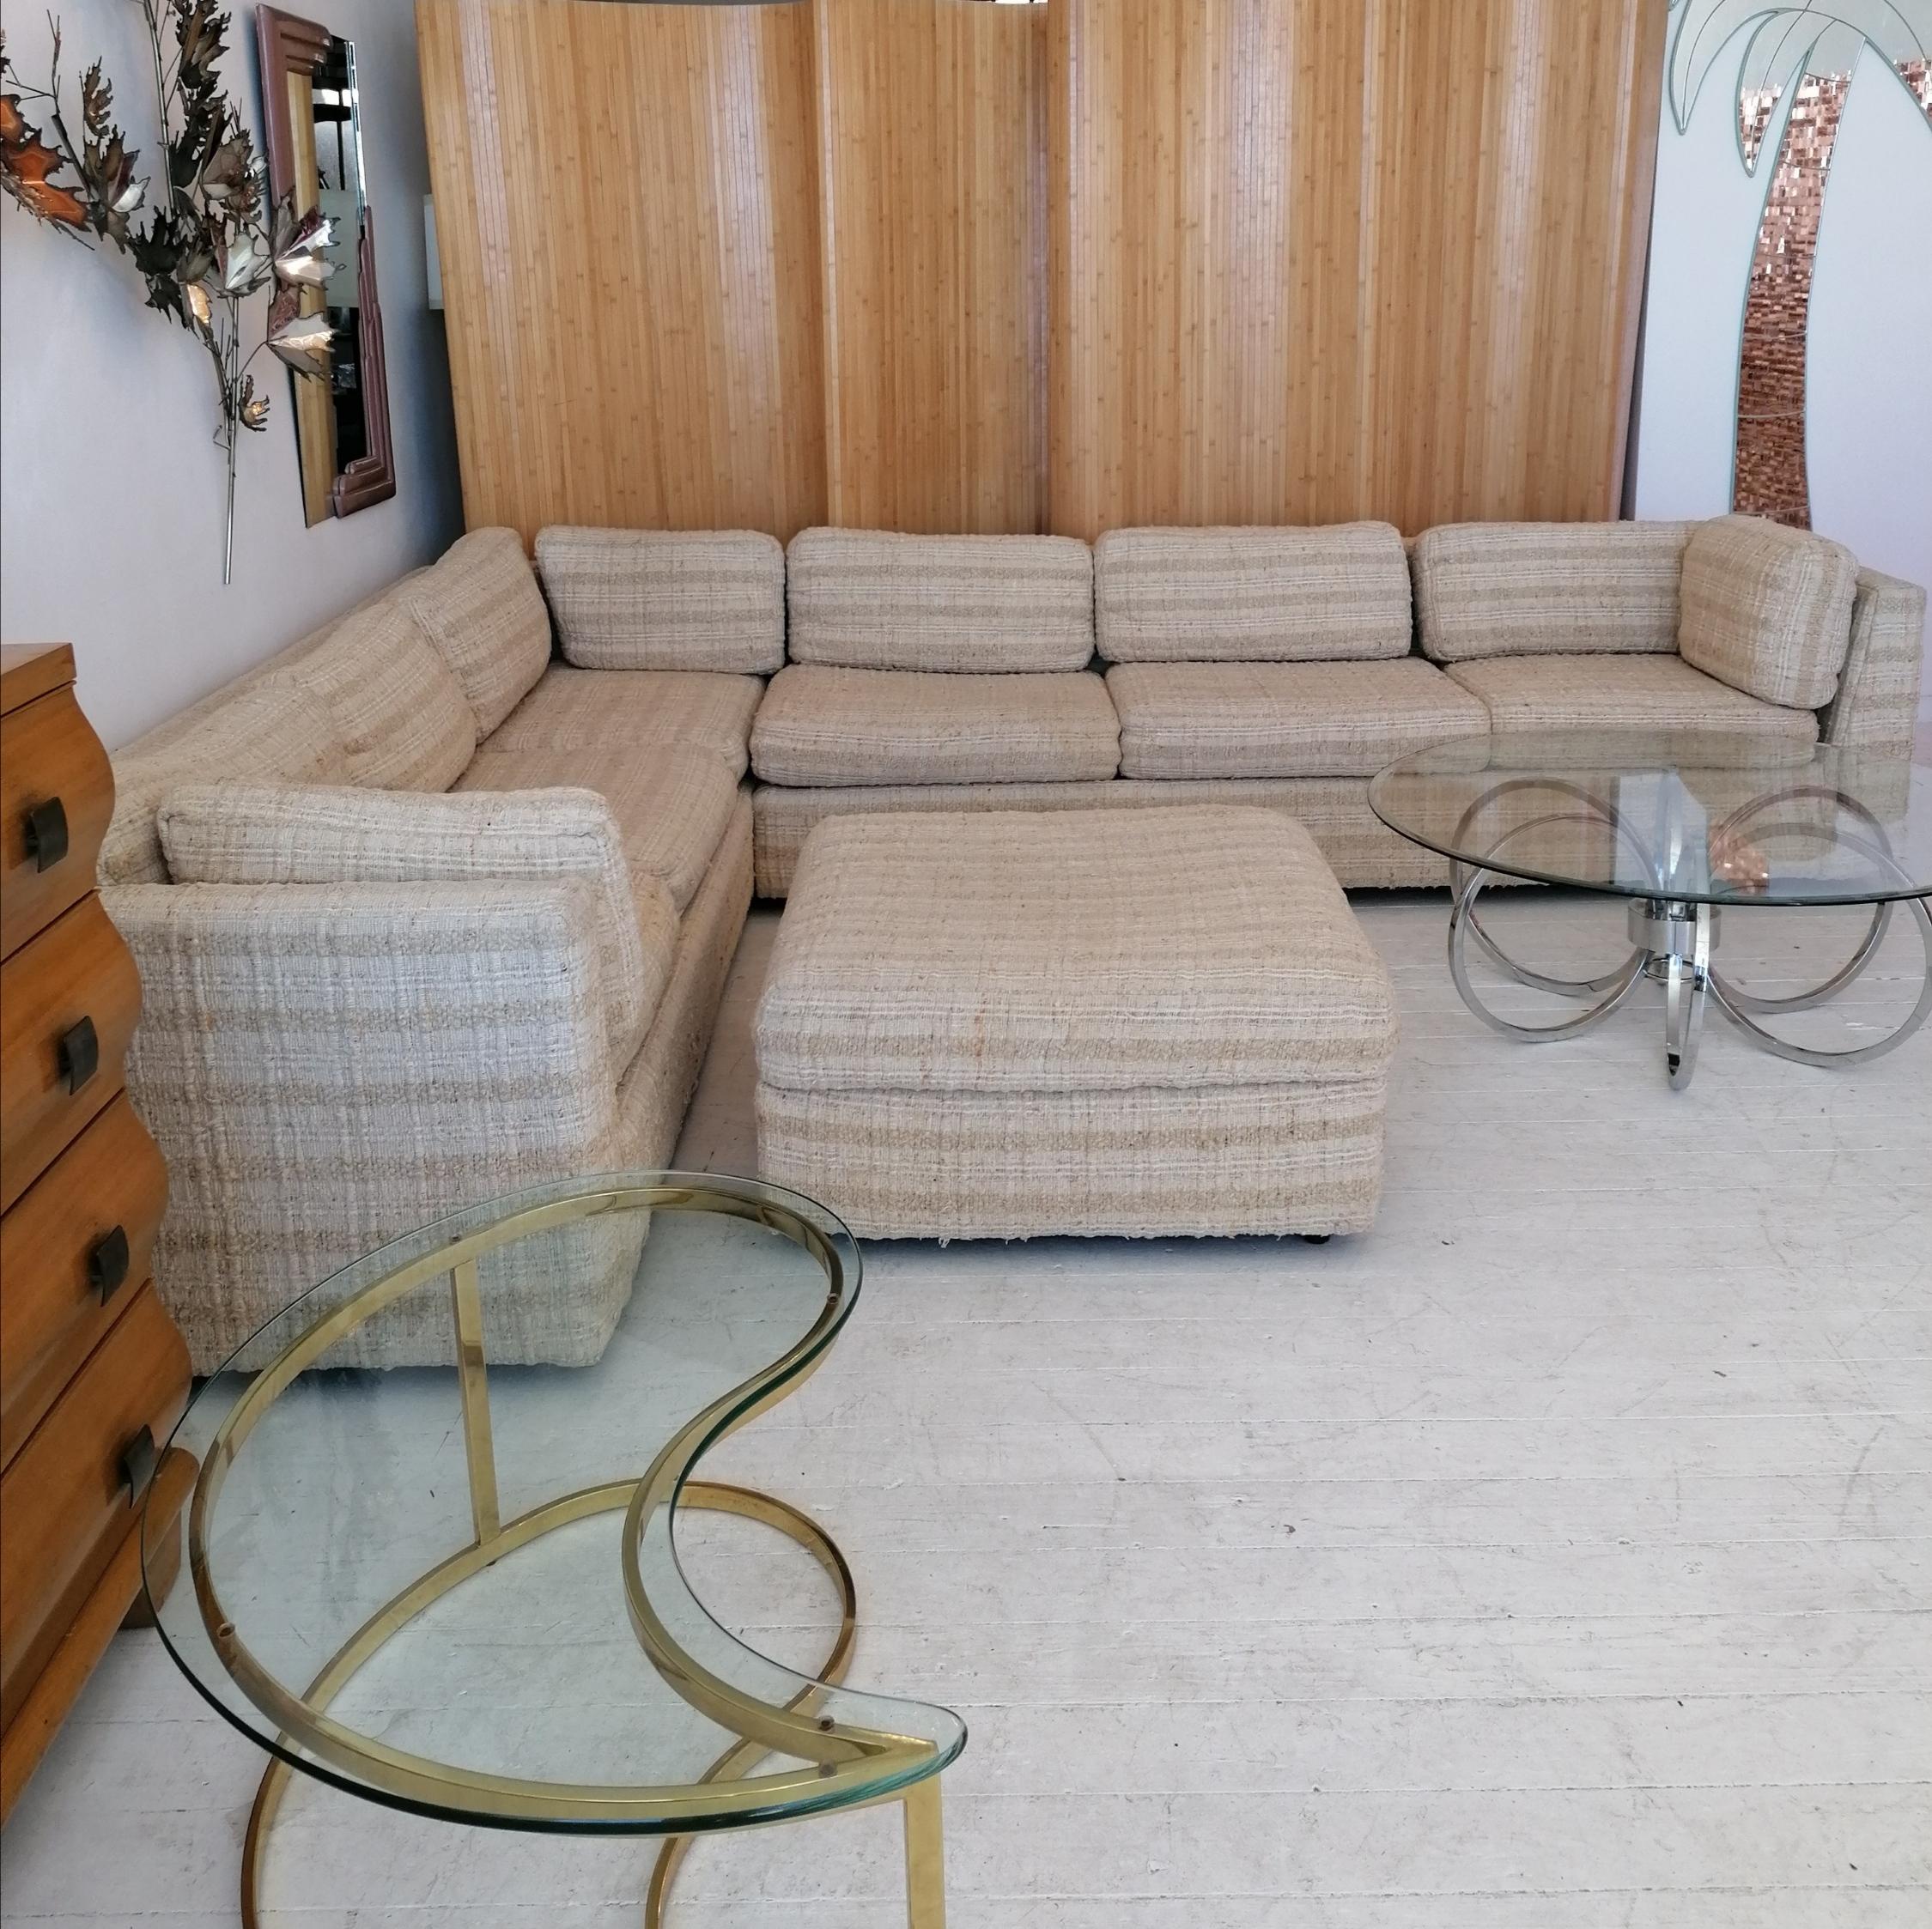 This huge bespoke 1970s American sectional sofa was bought from a high-end apartment in Palm Springs, California. Its amazing original Maria Kipp style woven heavily-textured upholstery is in overall good condition- there are a few pulled or loose